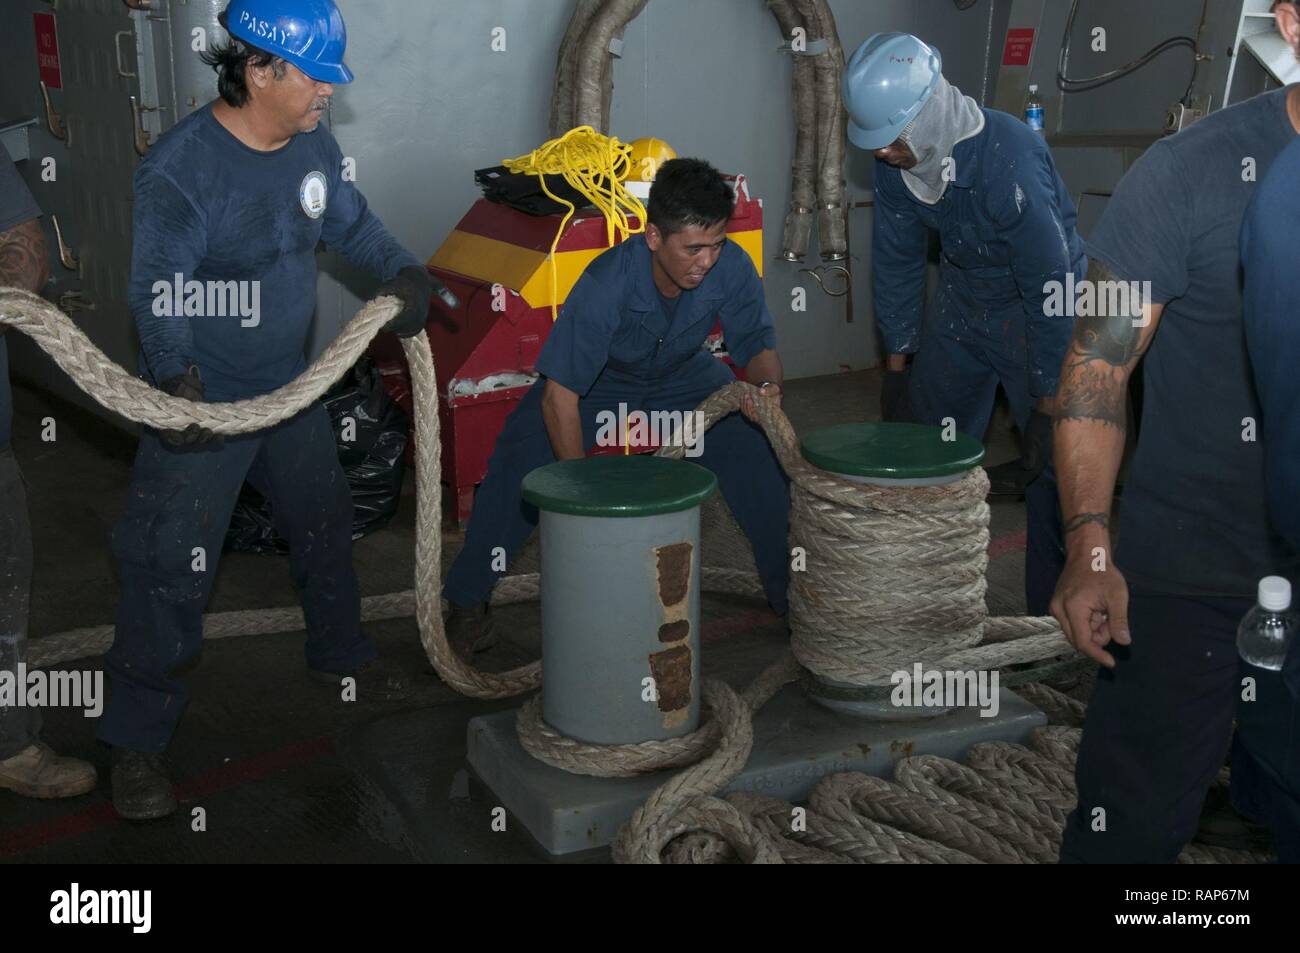 POLARIS POINT, Guam (Feb. 23, 2017) Military Sealift Command deck department, assigned to the submarine tender USS Frank Cable (AS 40), secure mooring lines after the ship shifted to Bravo Pier at Polaris Point, Guam, Feb. 23.  Frank Cable is forward deployed to the island of Guam and conducts maintenance and support of submarines and surface vessels deployed to the U.S. 5th and 7th Fleet area of operations. Stock Photo